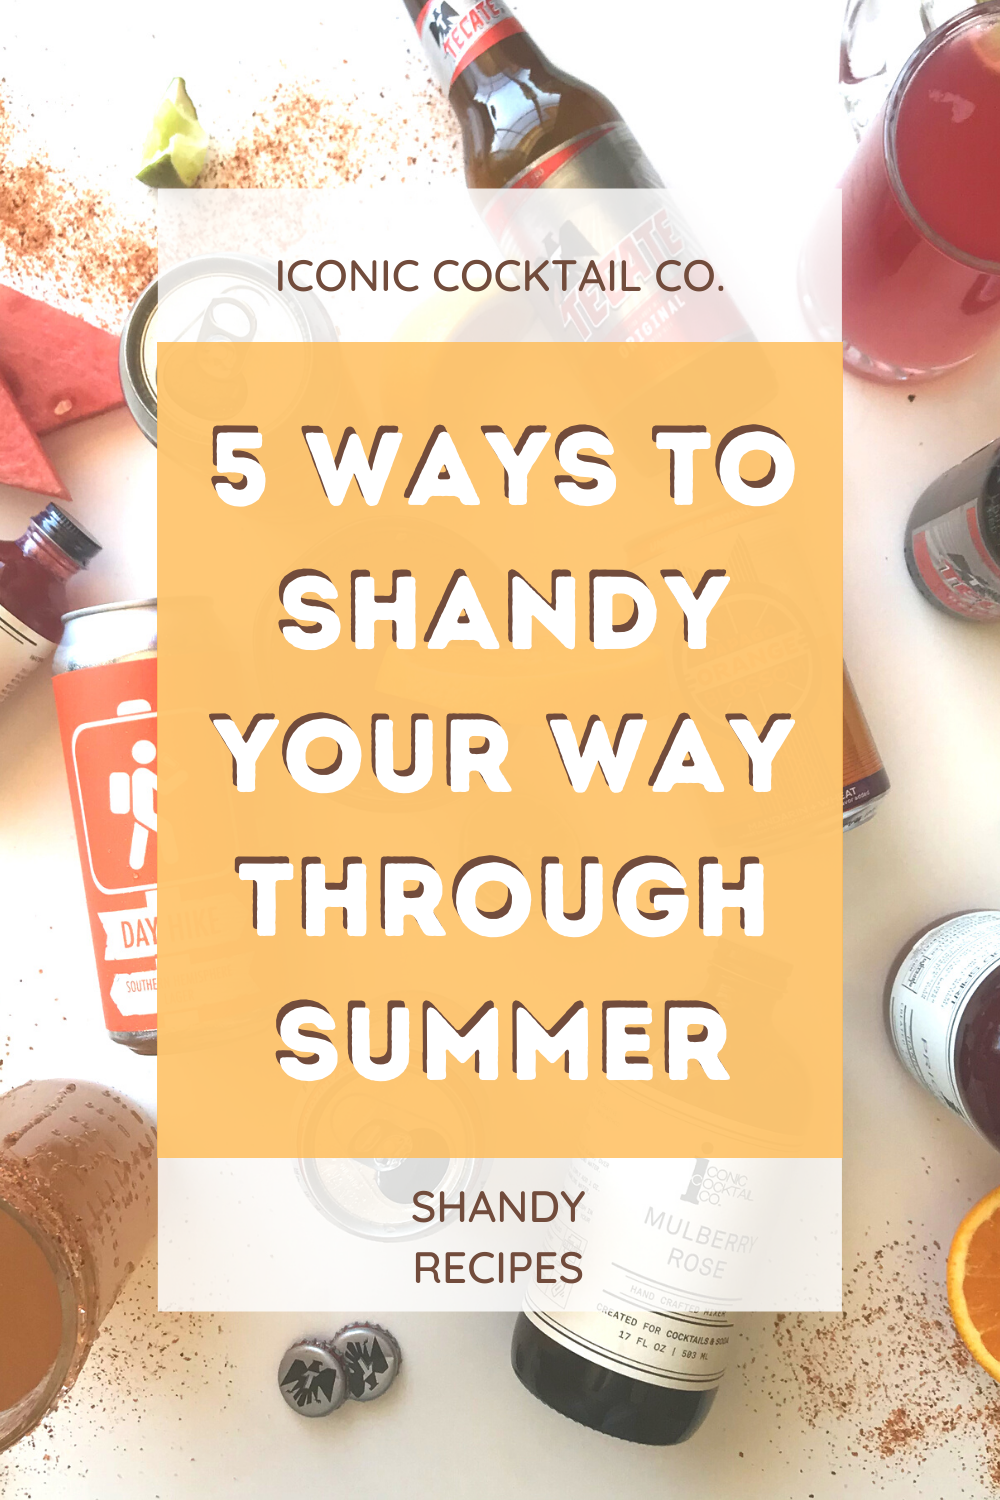 5 Ways to Shandy Your Way Through the Summer